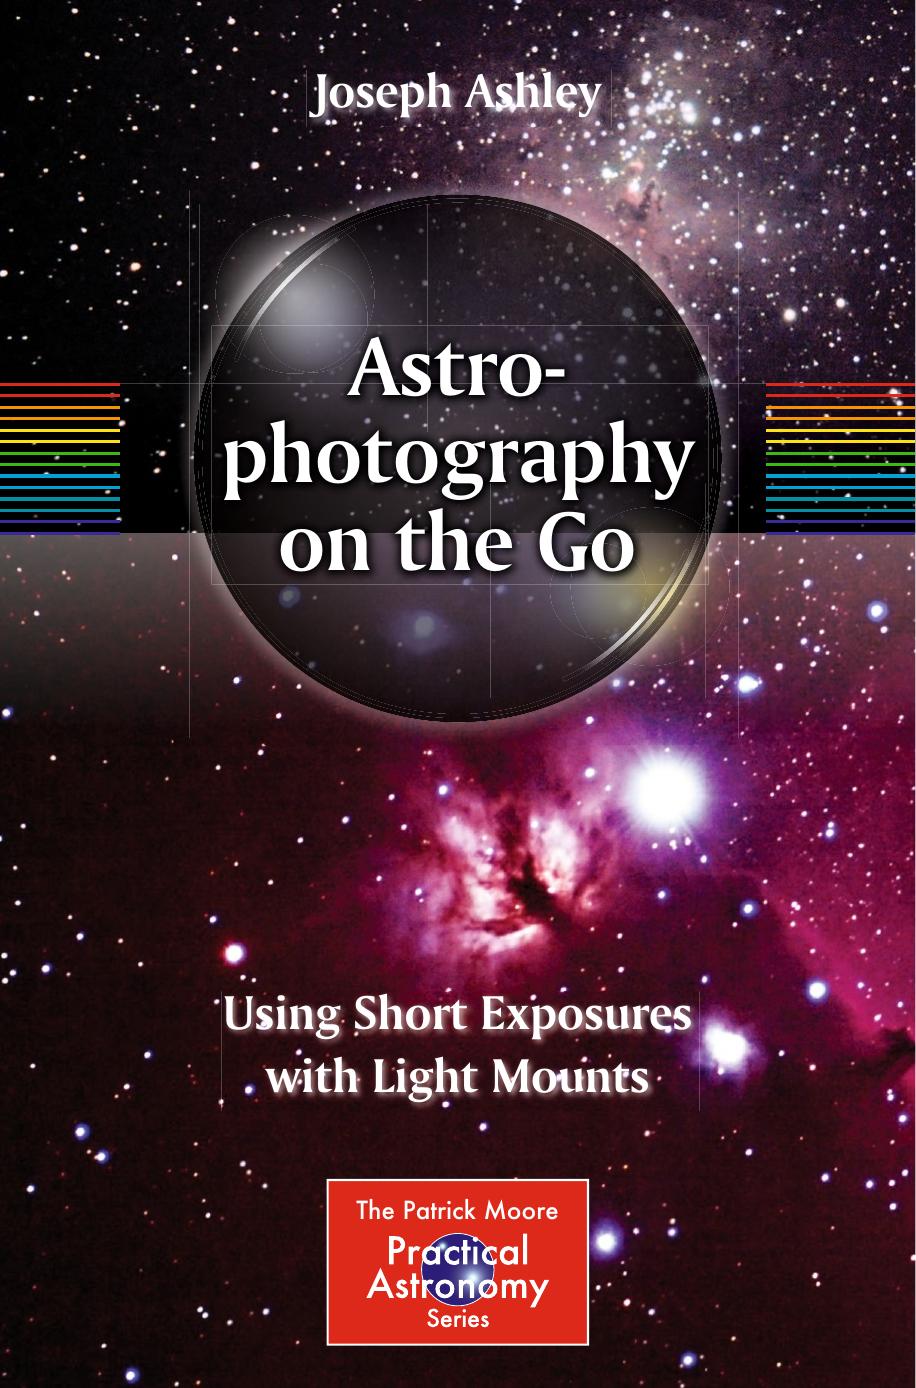 Astrophotography on the Go: Using Short Exposures With Light Mounts by Joseph Ashley